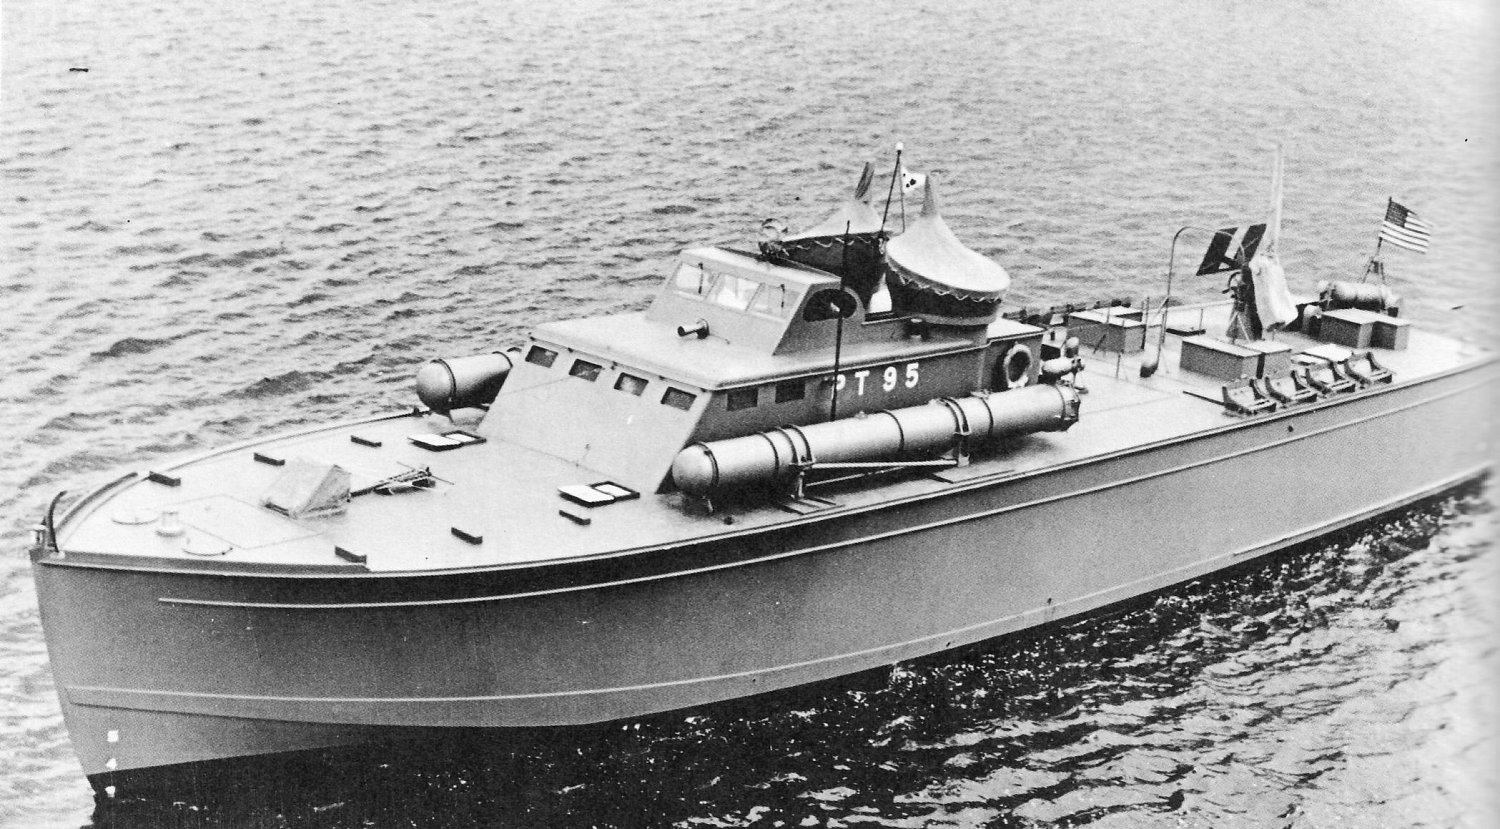 PT-95, a Huckins 78-foot motor torpedo boat, in Jacksonville, Florida, United States, Jul 1942. Note how lightly armed this boat is compared to later boats in the forward areas.